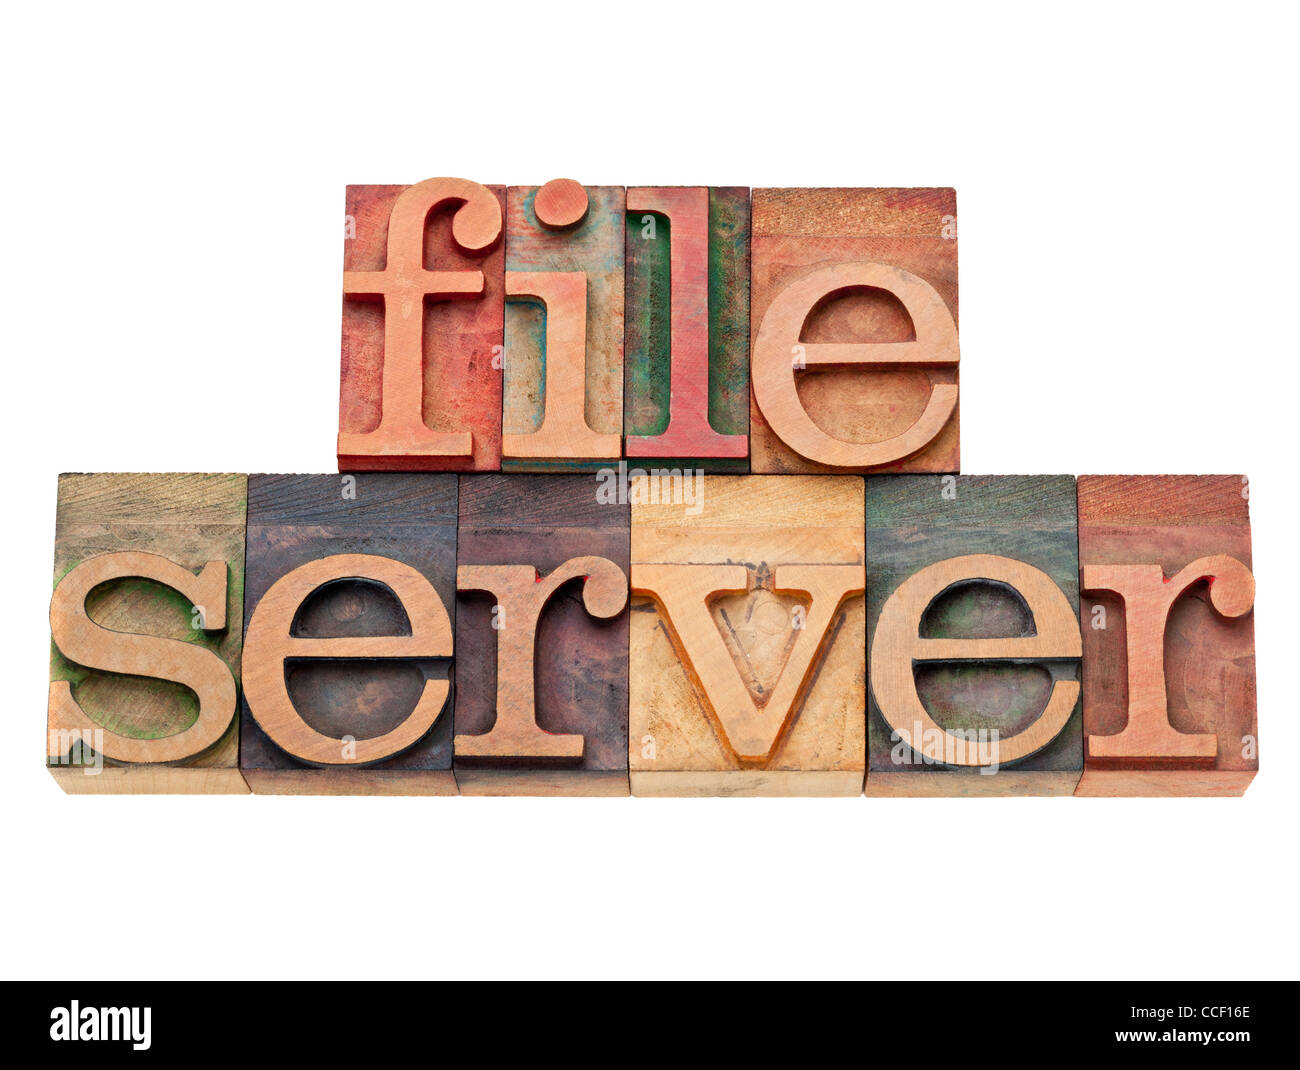 file server - computer network concept - isolated text in vintage wood letterpress printing blocks Stock Photo